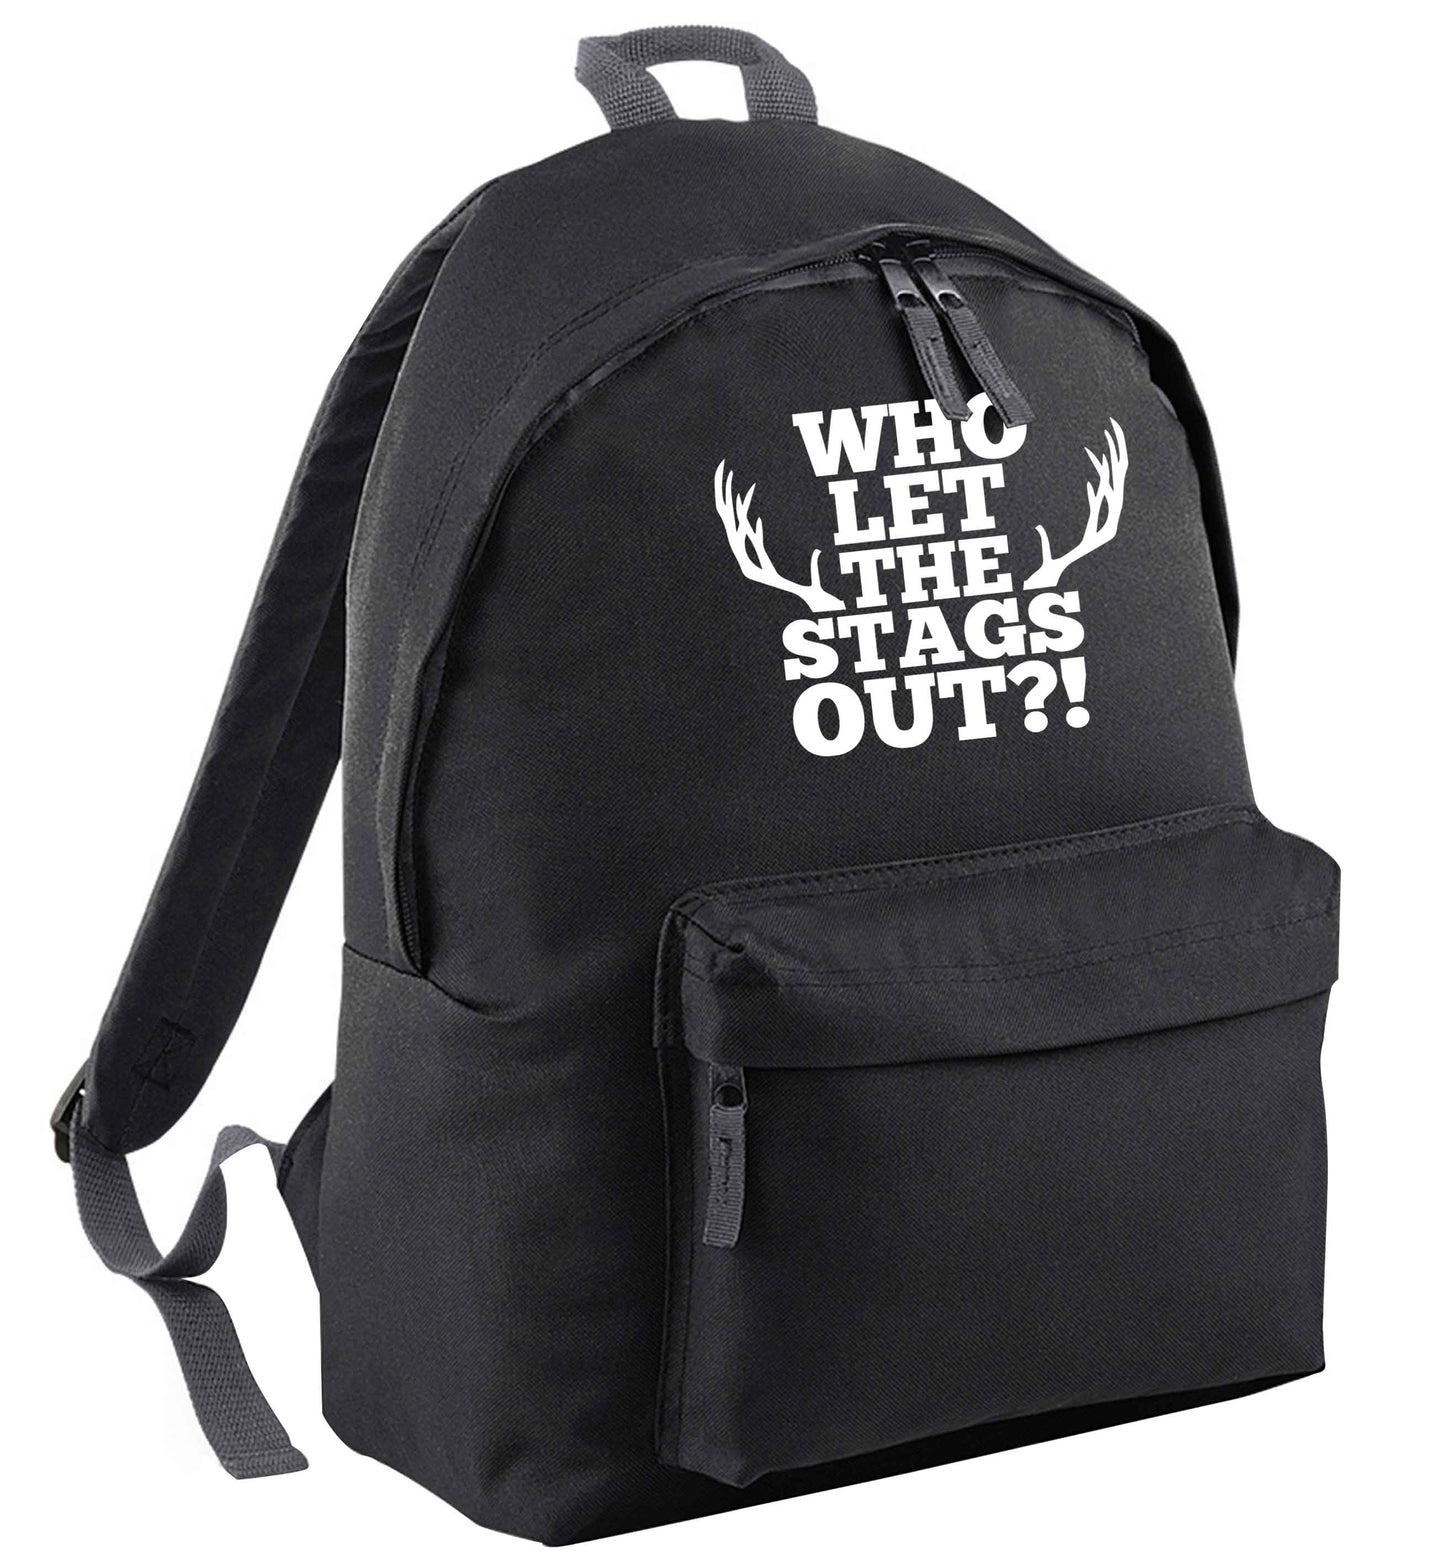 Who let the stags out black adults backpack